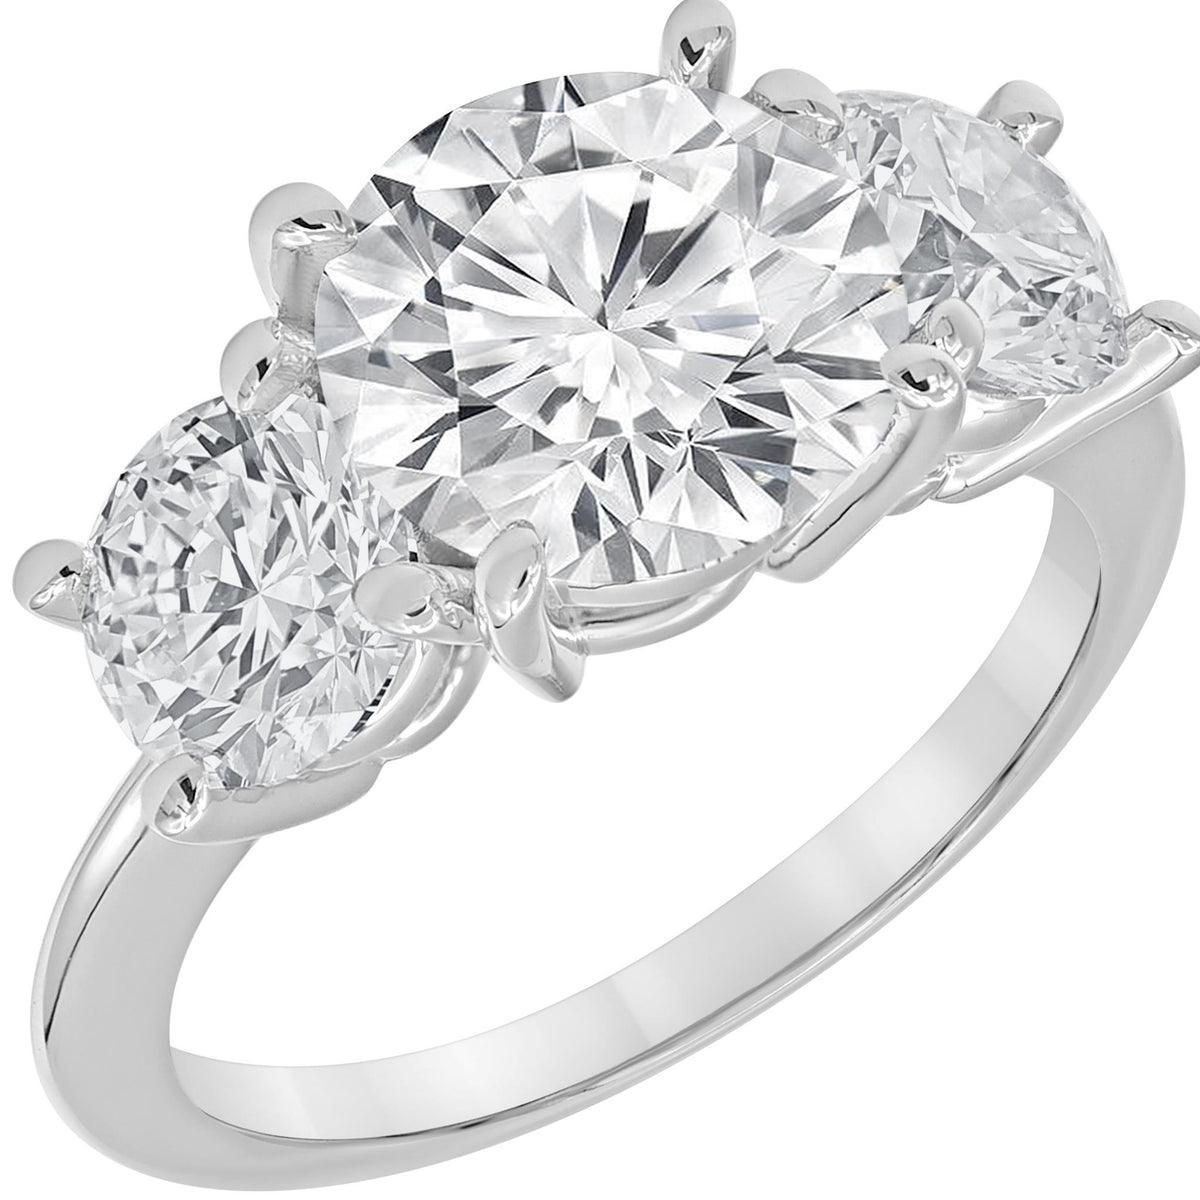 14Kt White Gold Three-Stone Ring With 3.02cttw Lab-Grown Center Diamonds